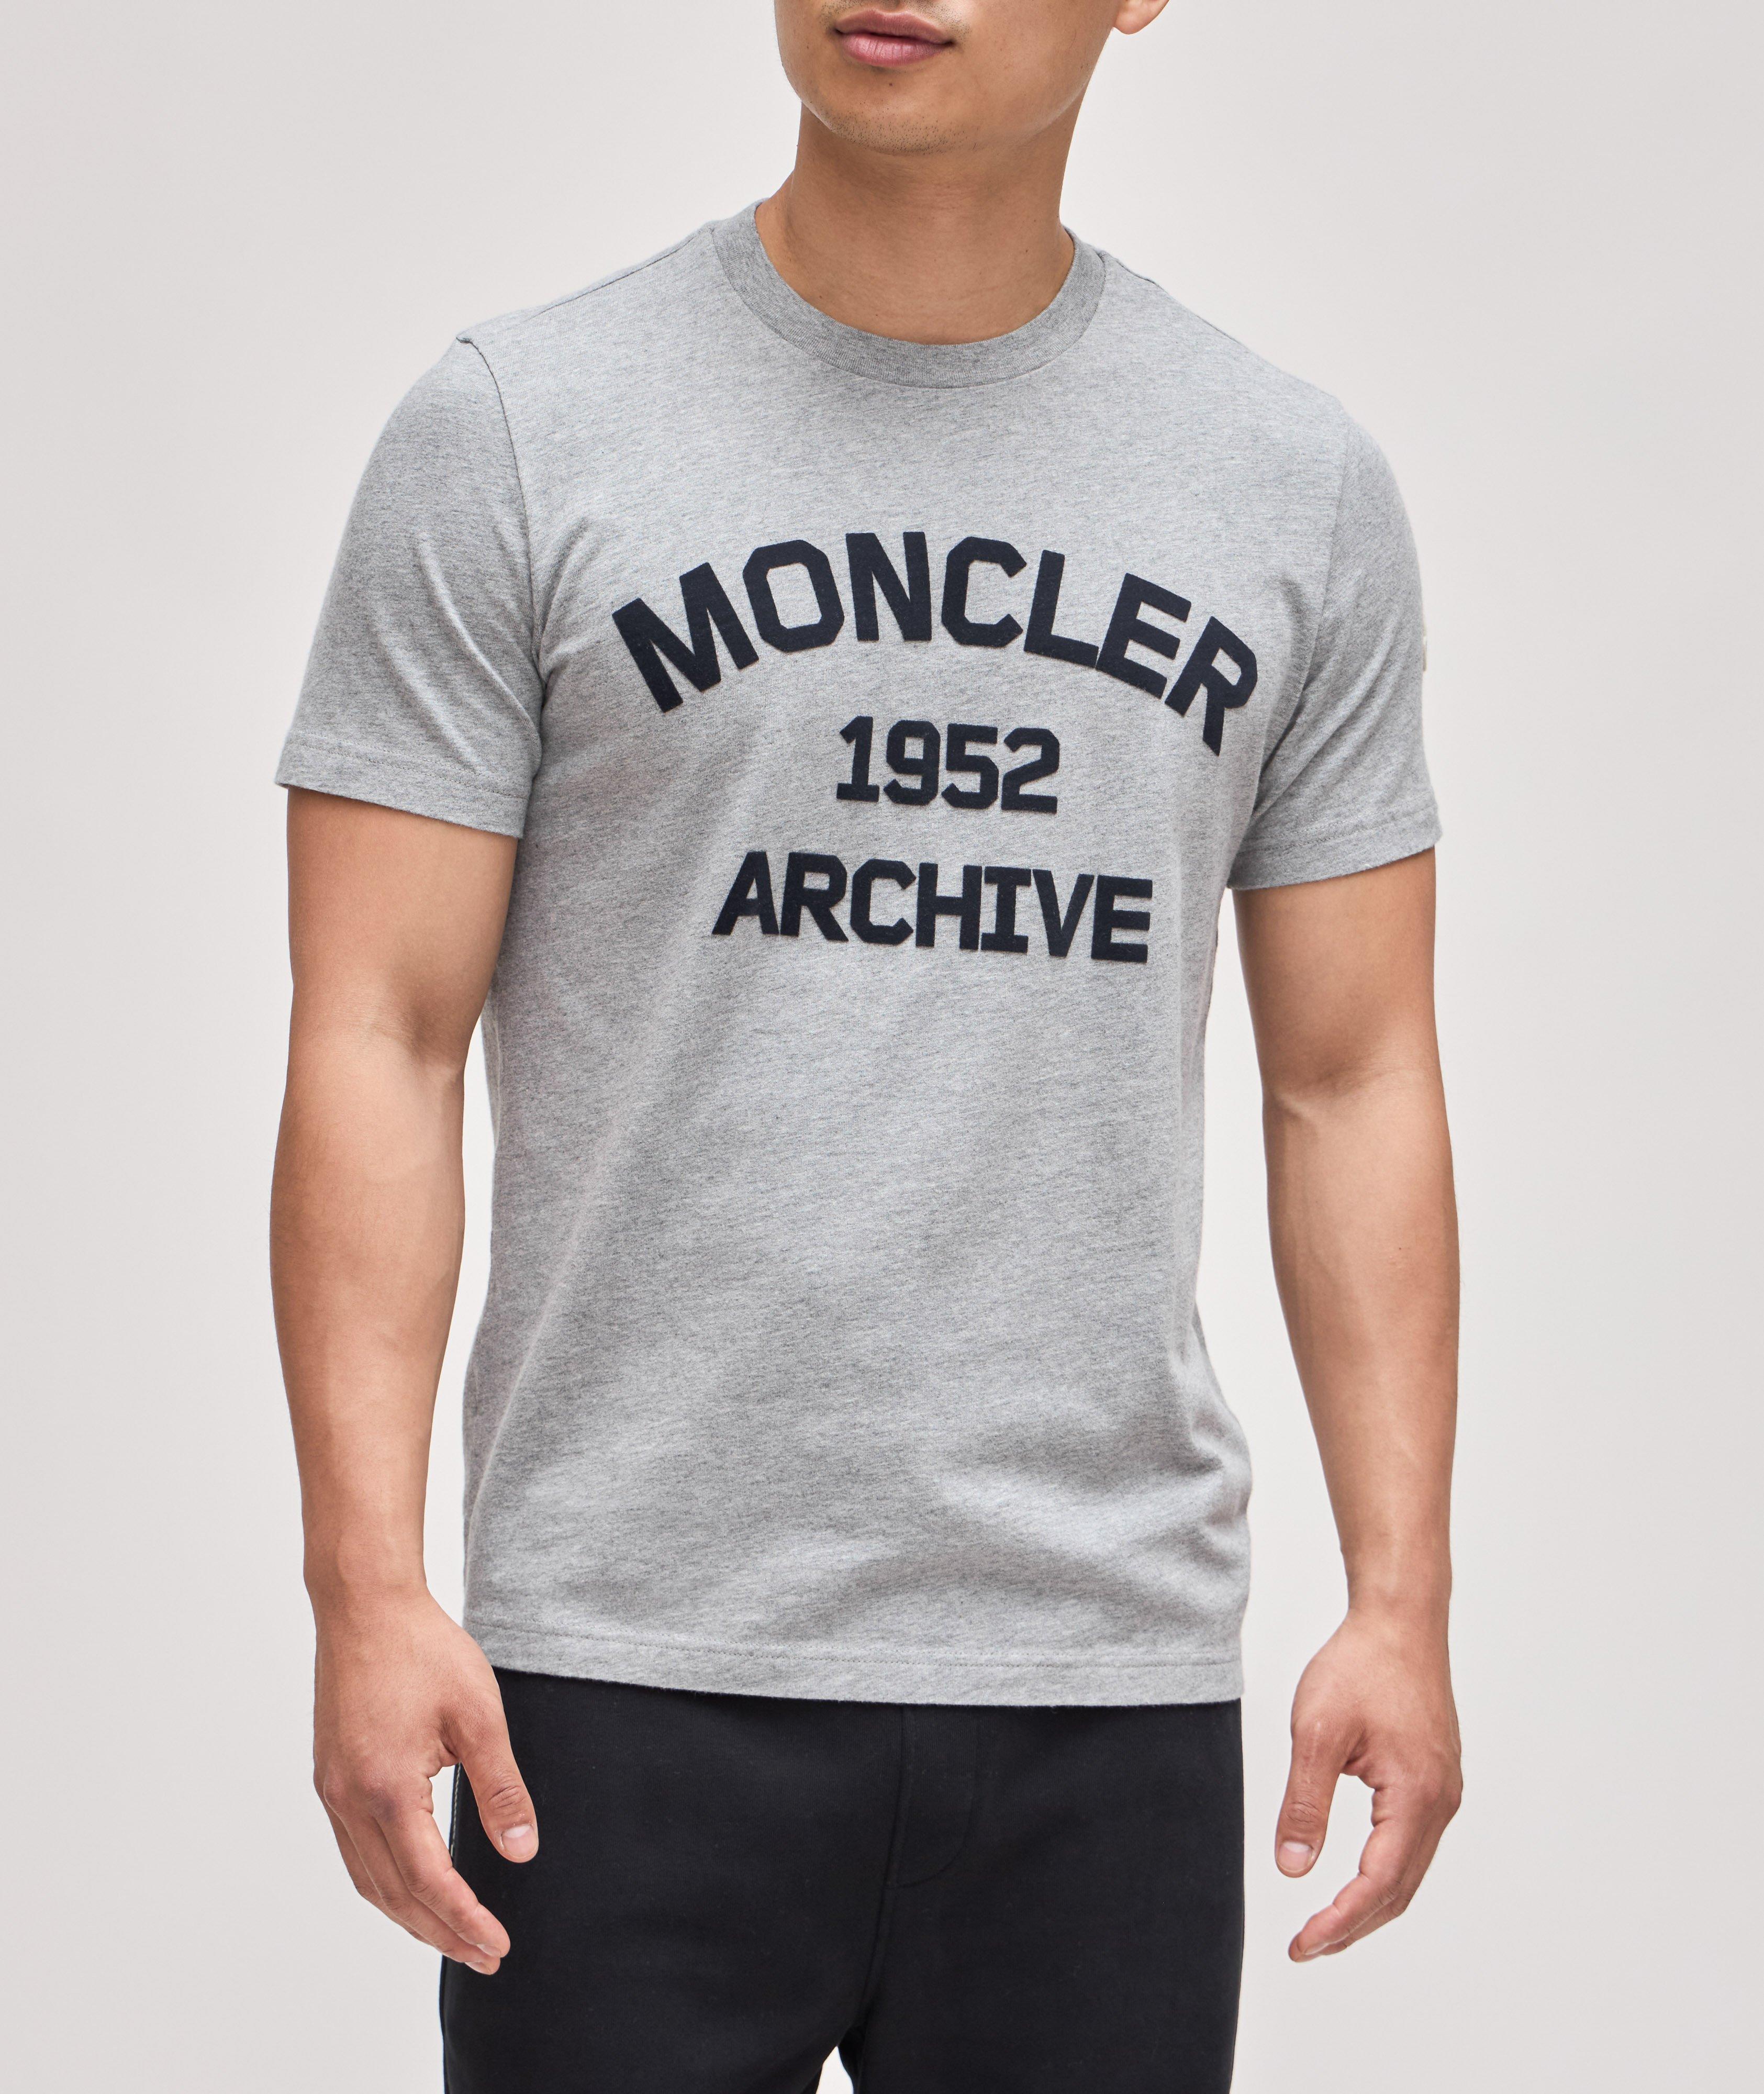 T-shirt, collection d’archives image 1